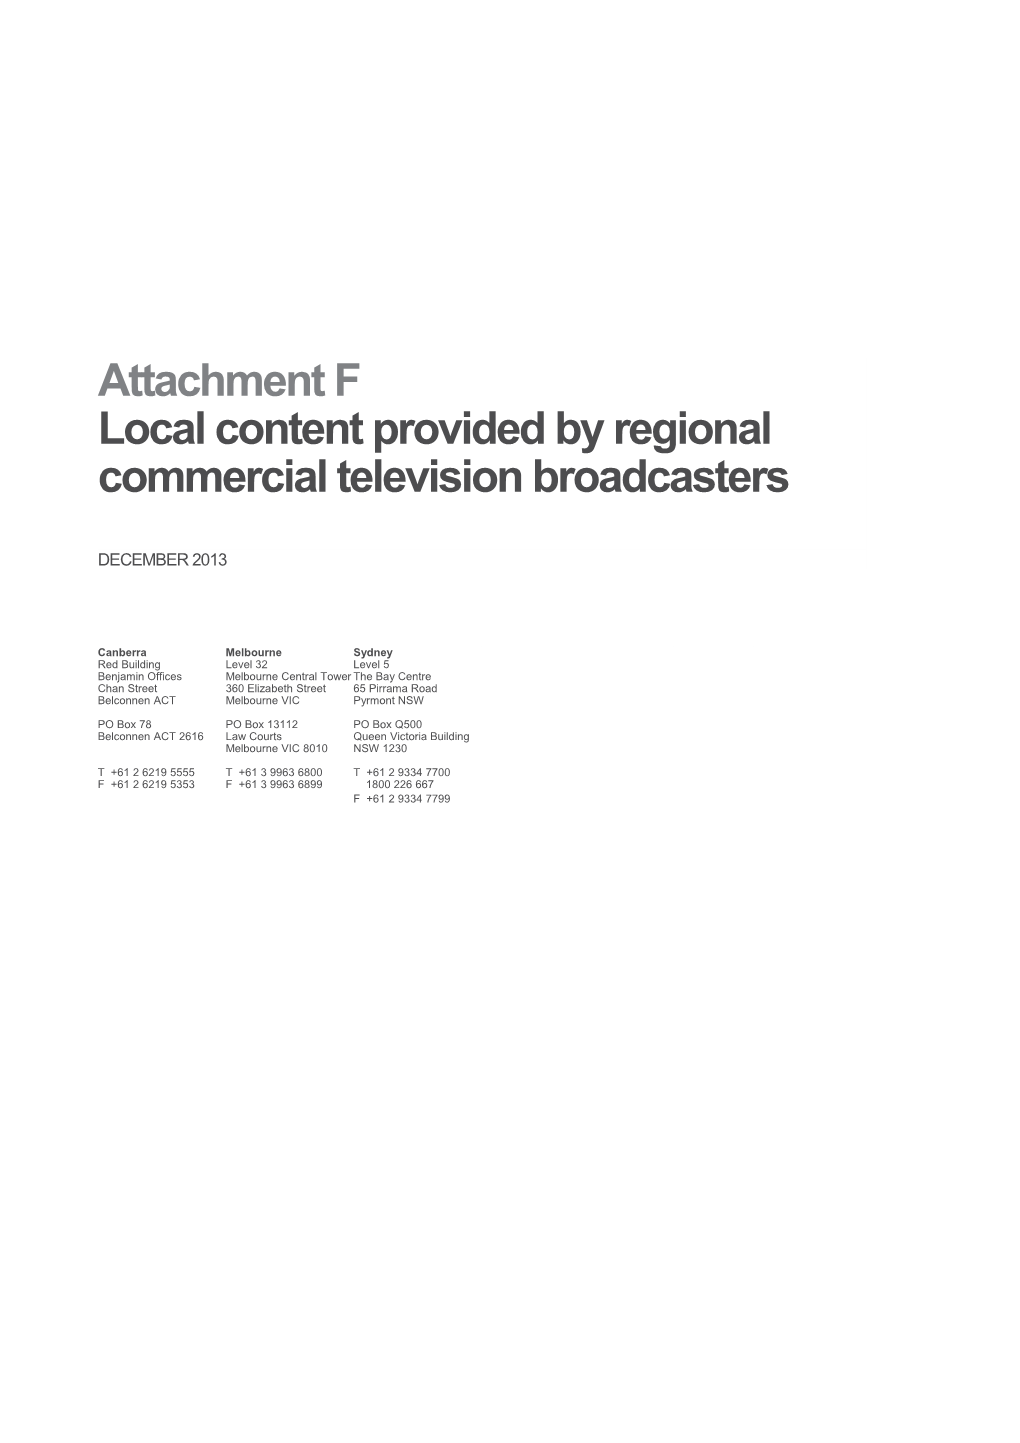 Licence Areas with Regulatory Local Content Obligation